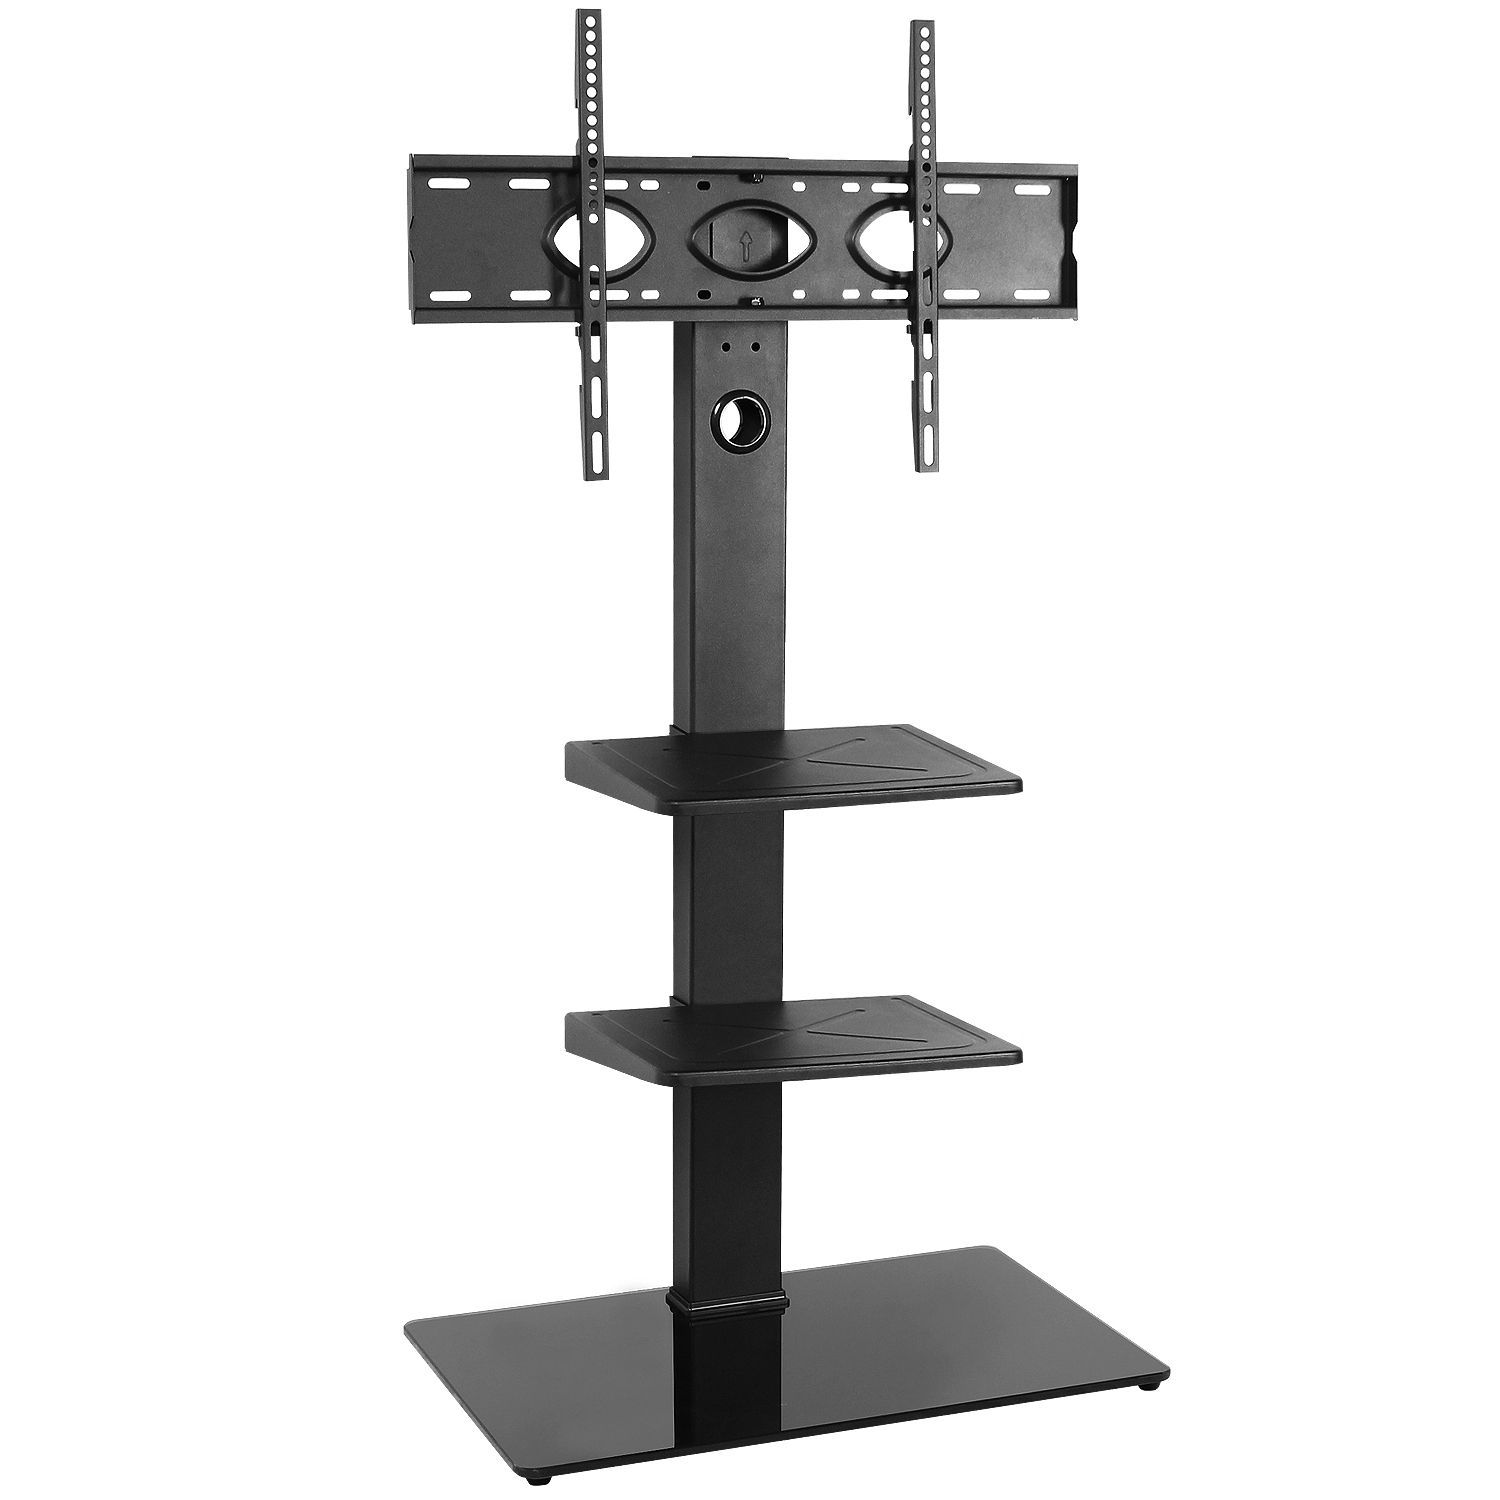 Modern Floor Tv Stands With Swivel Metal Mount Inside Most Recent 5rcom Floor Corner Tall Tv Stand With Swivel Mount For  (View 8 of 10)